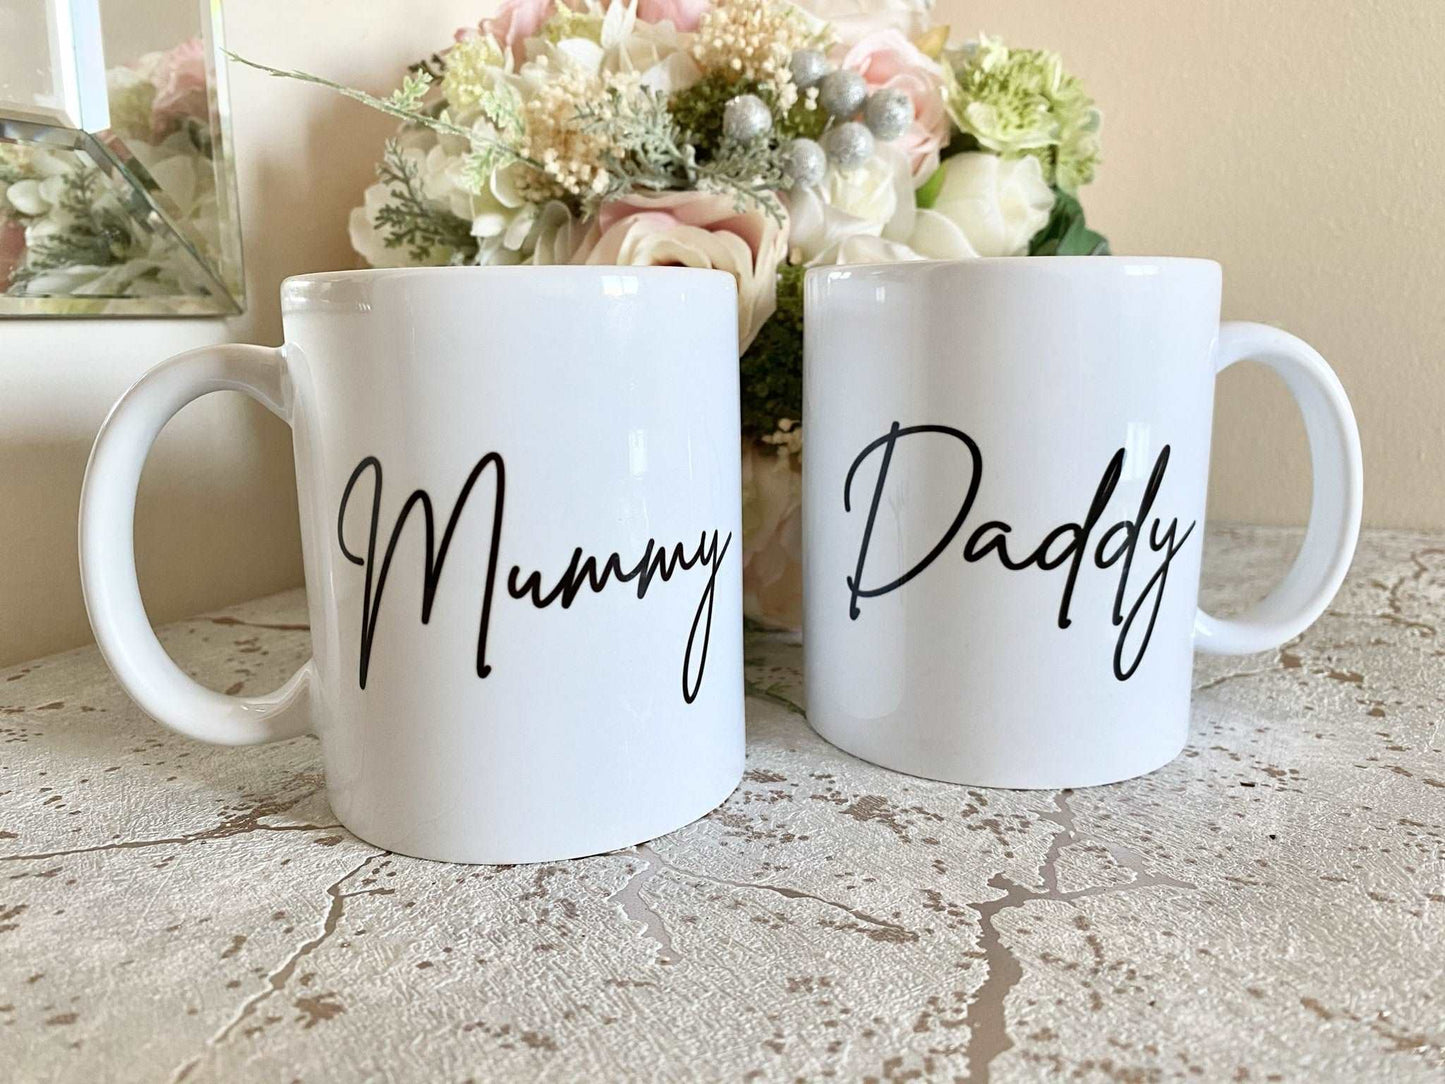 set of two white mugs. One has the text mummy printed on in a script font, the other has daddy printed on